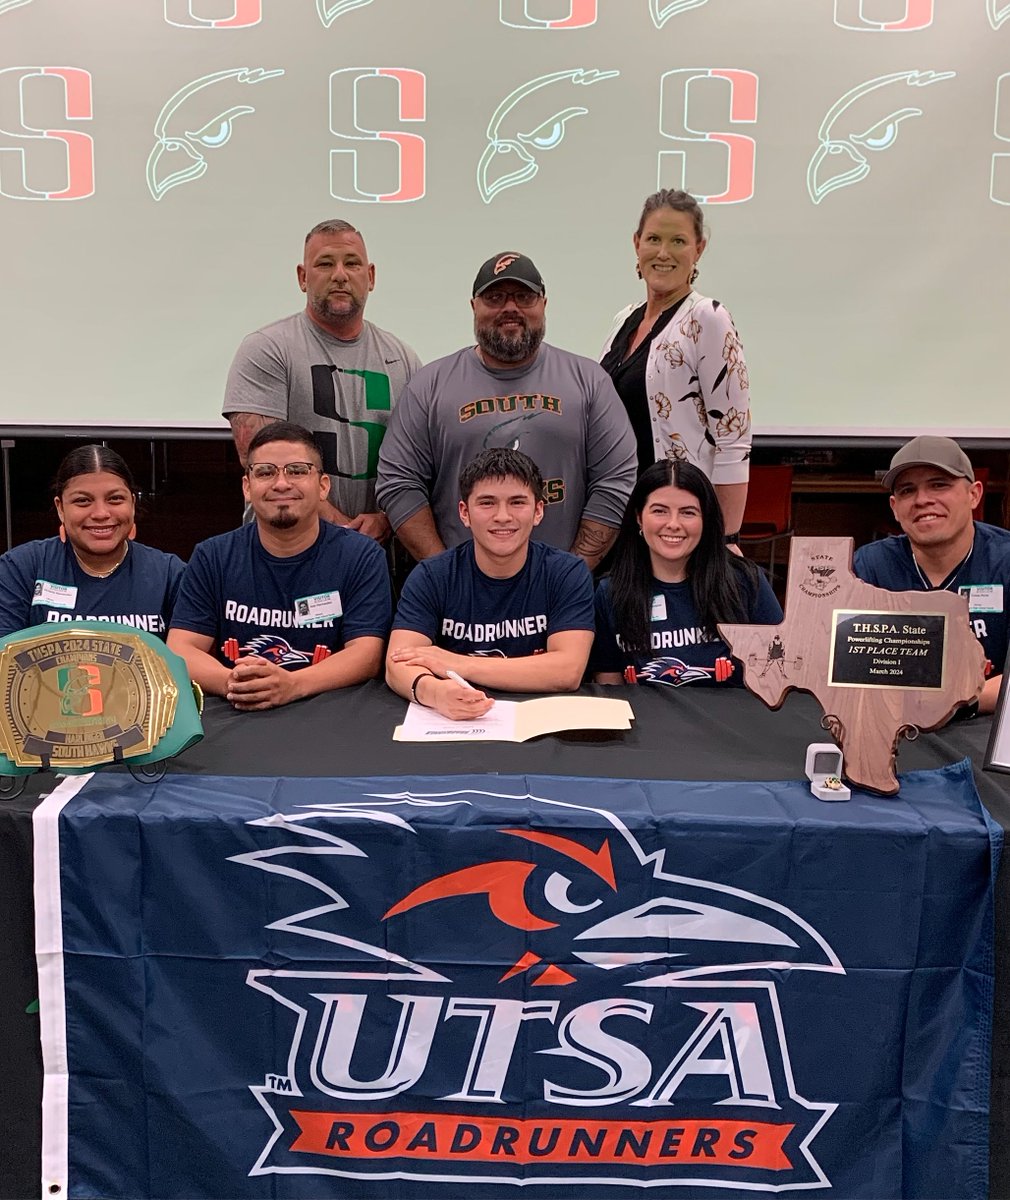 Congratulations to Harlingen High School South student-athlete, Ethan Hernandez, who just signed his letter of intent to join the University of Texas at San Antonio powerlifting team! We wish you the best for next year!